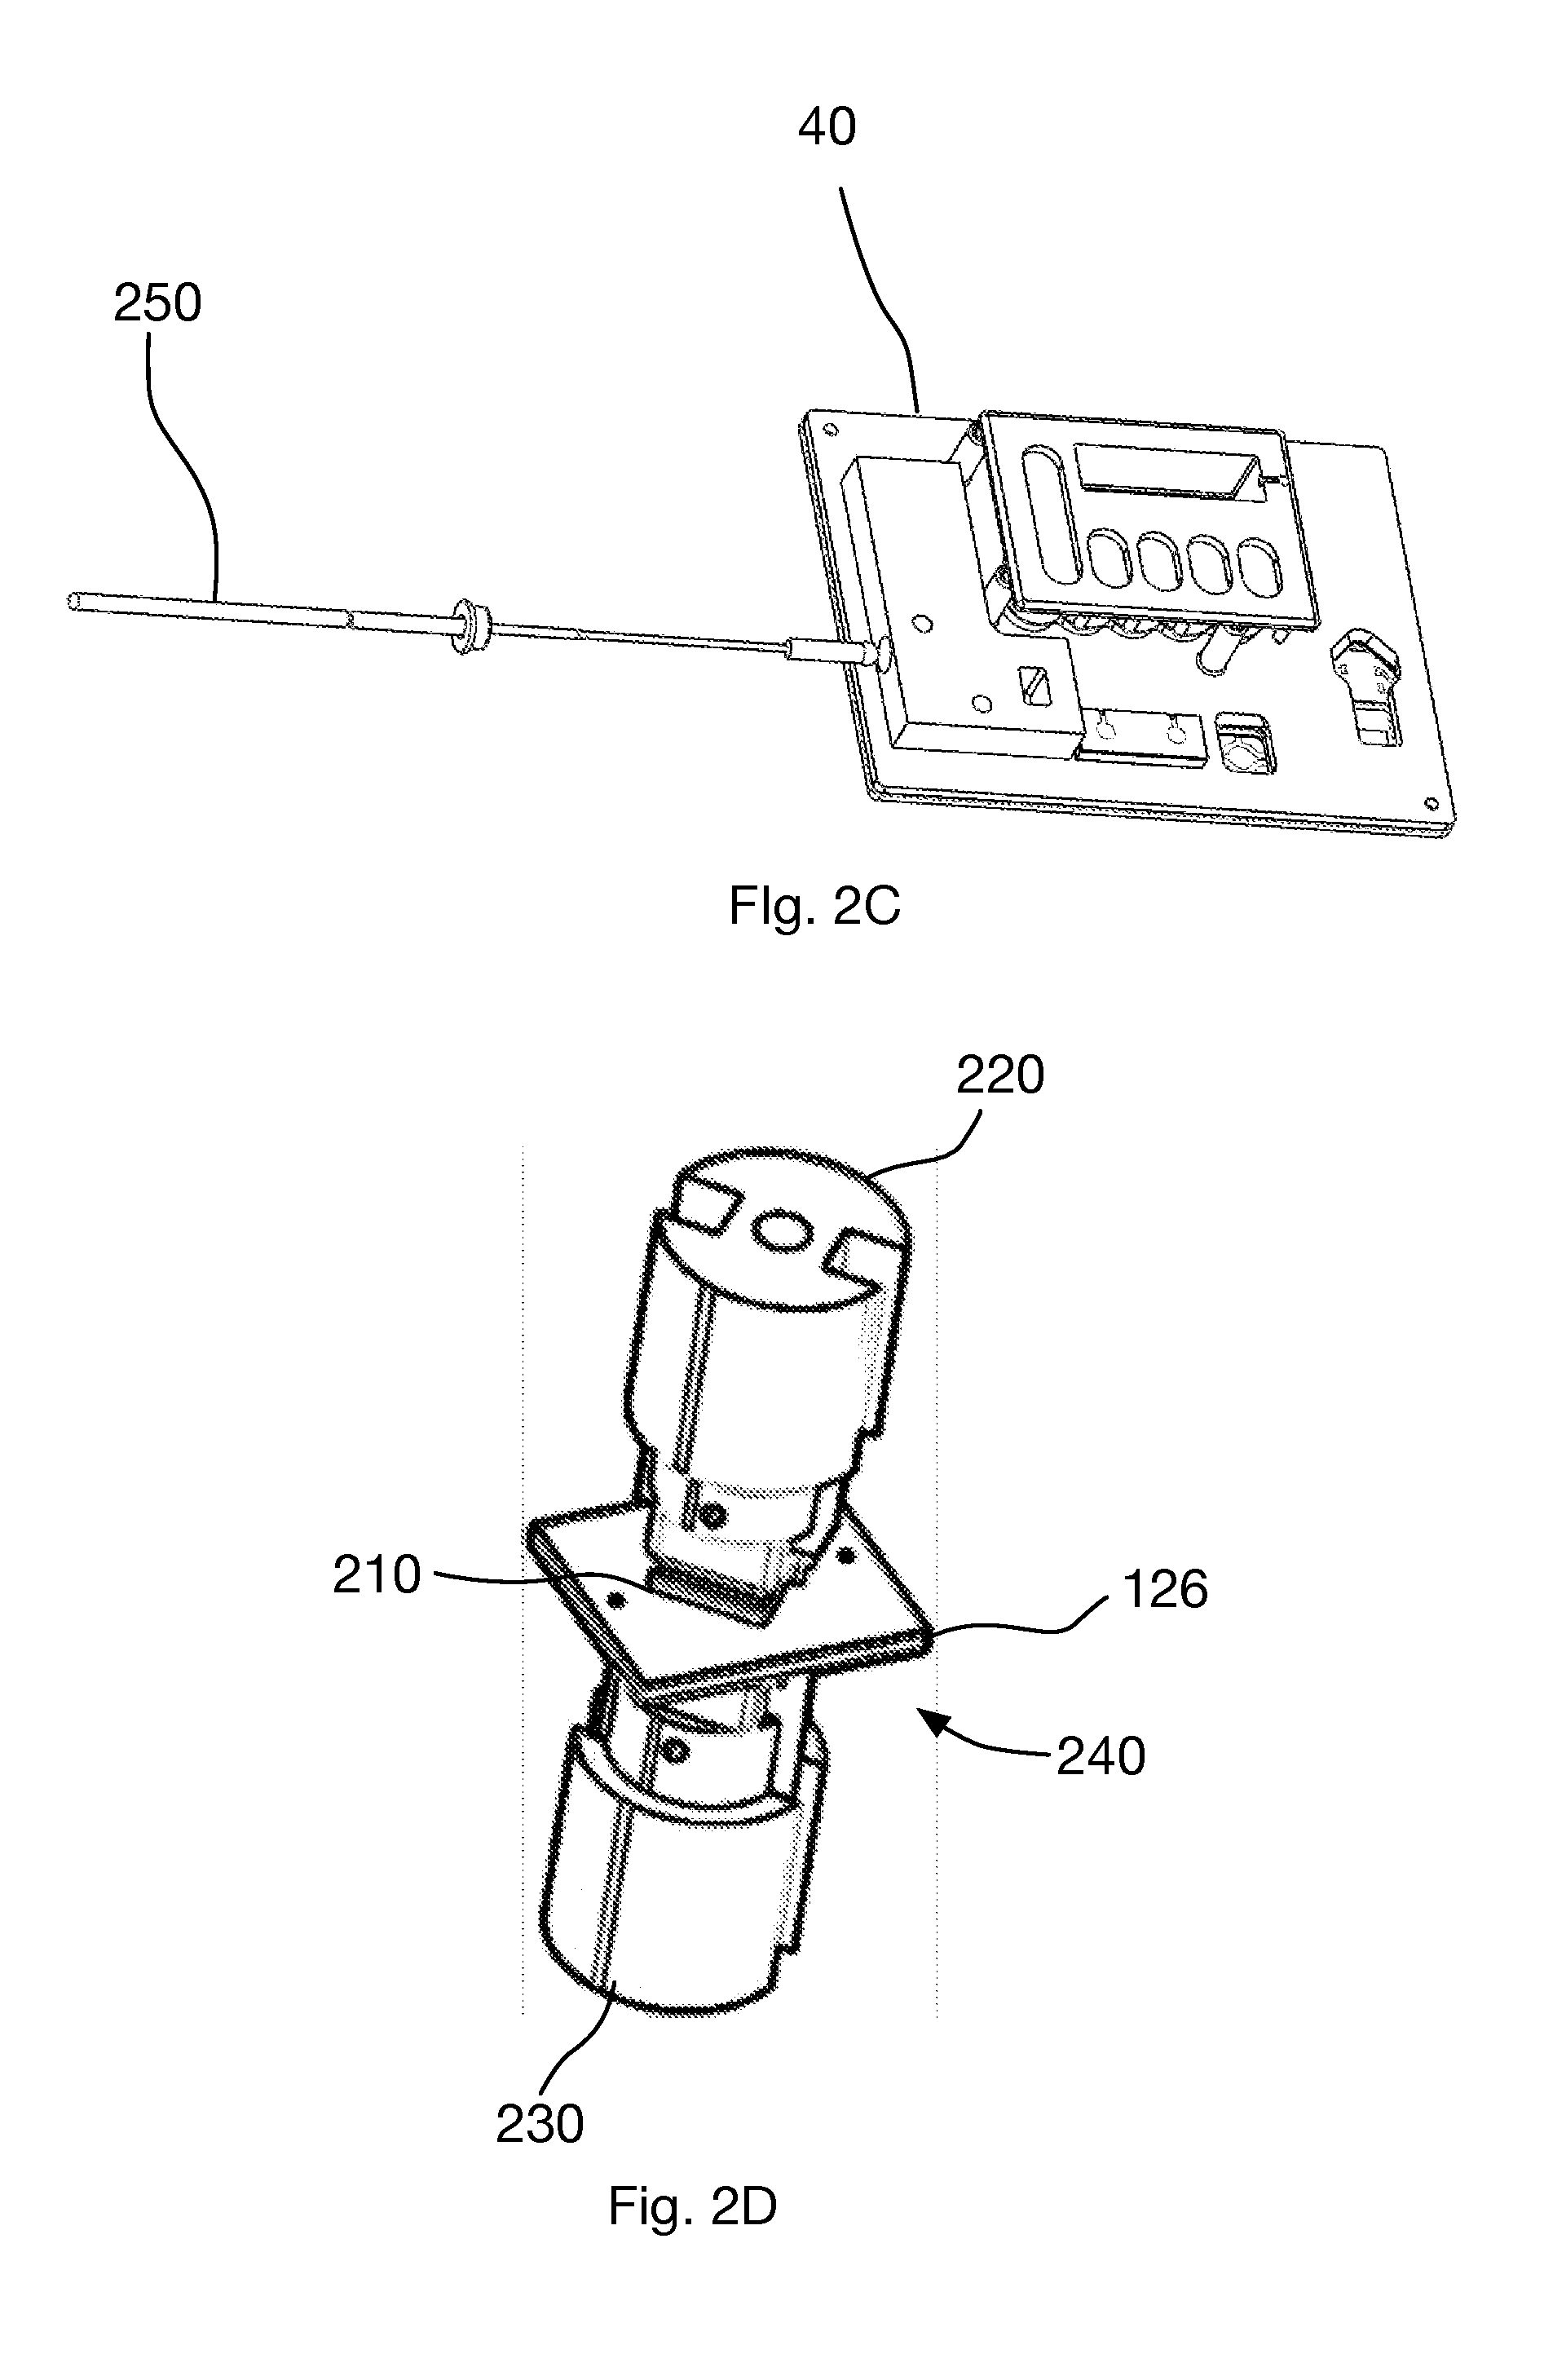 Portable nucleic acid analysis system and high-performance microfluidic electroactive polymer actuators